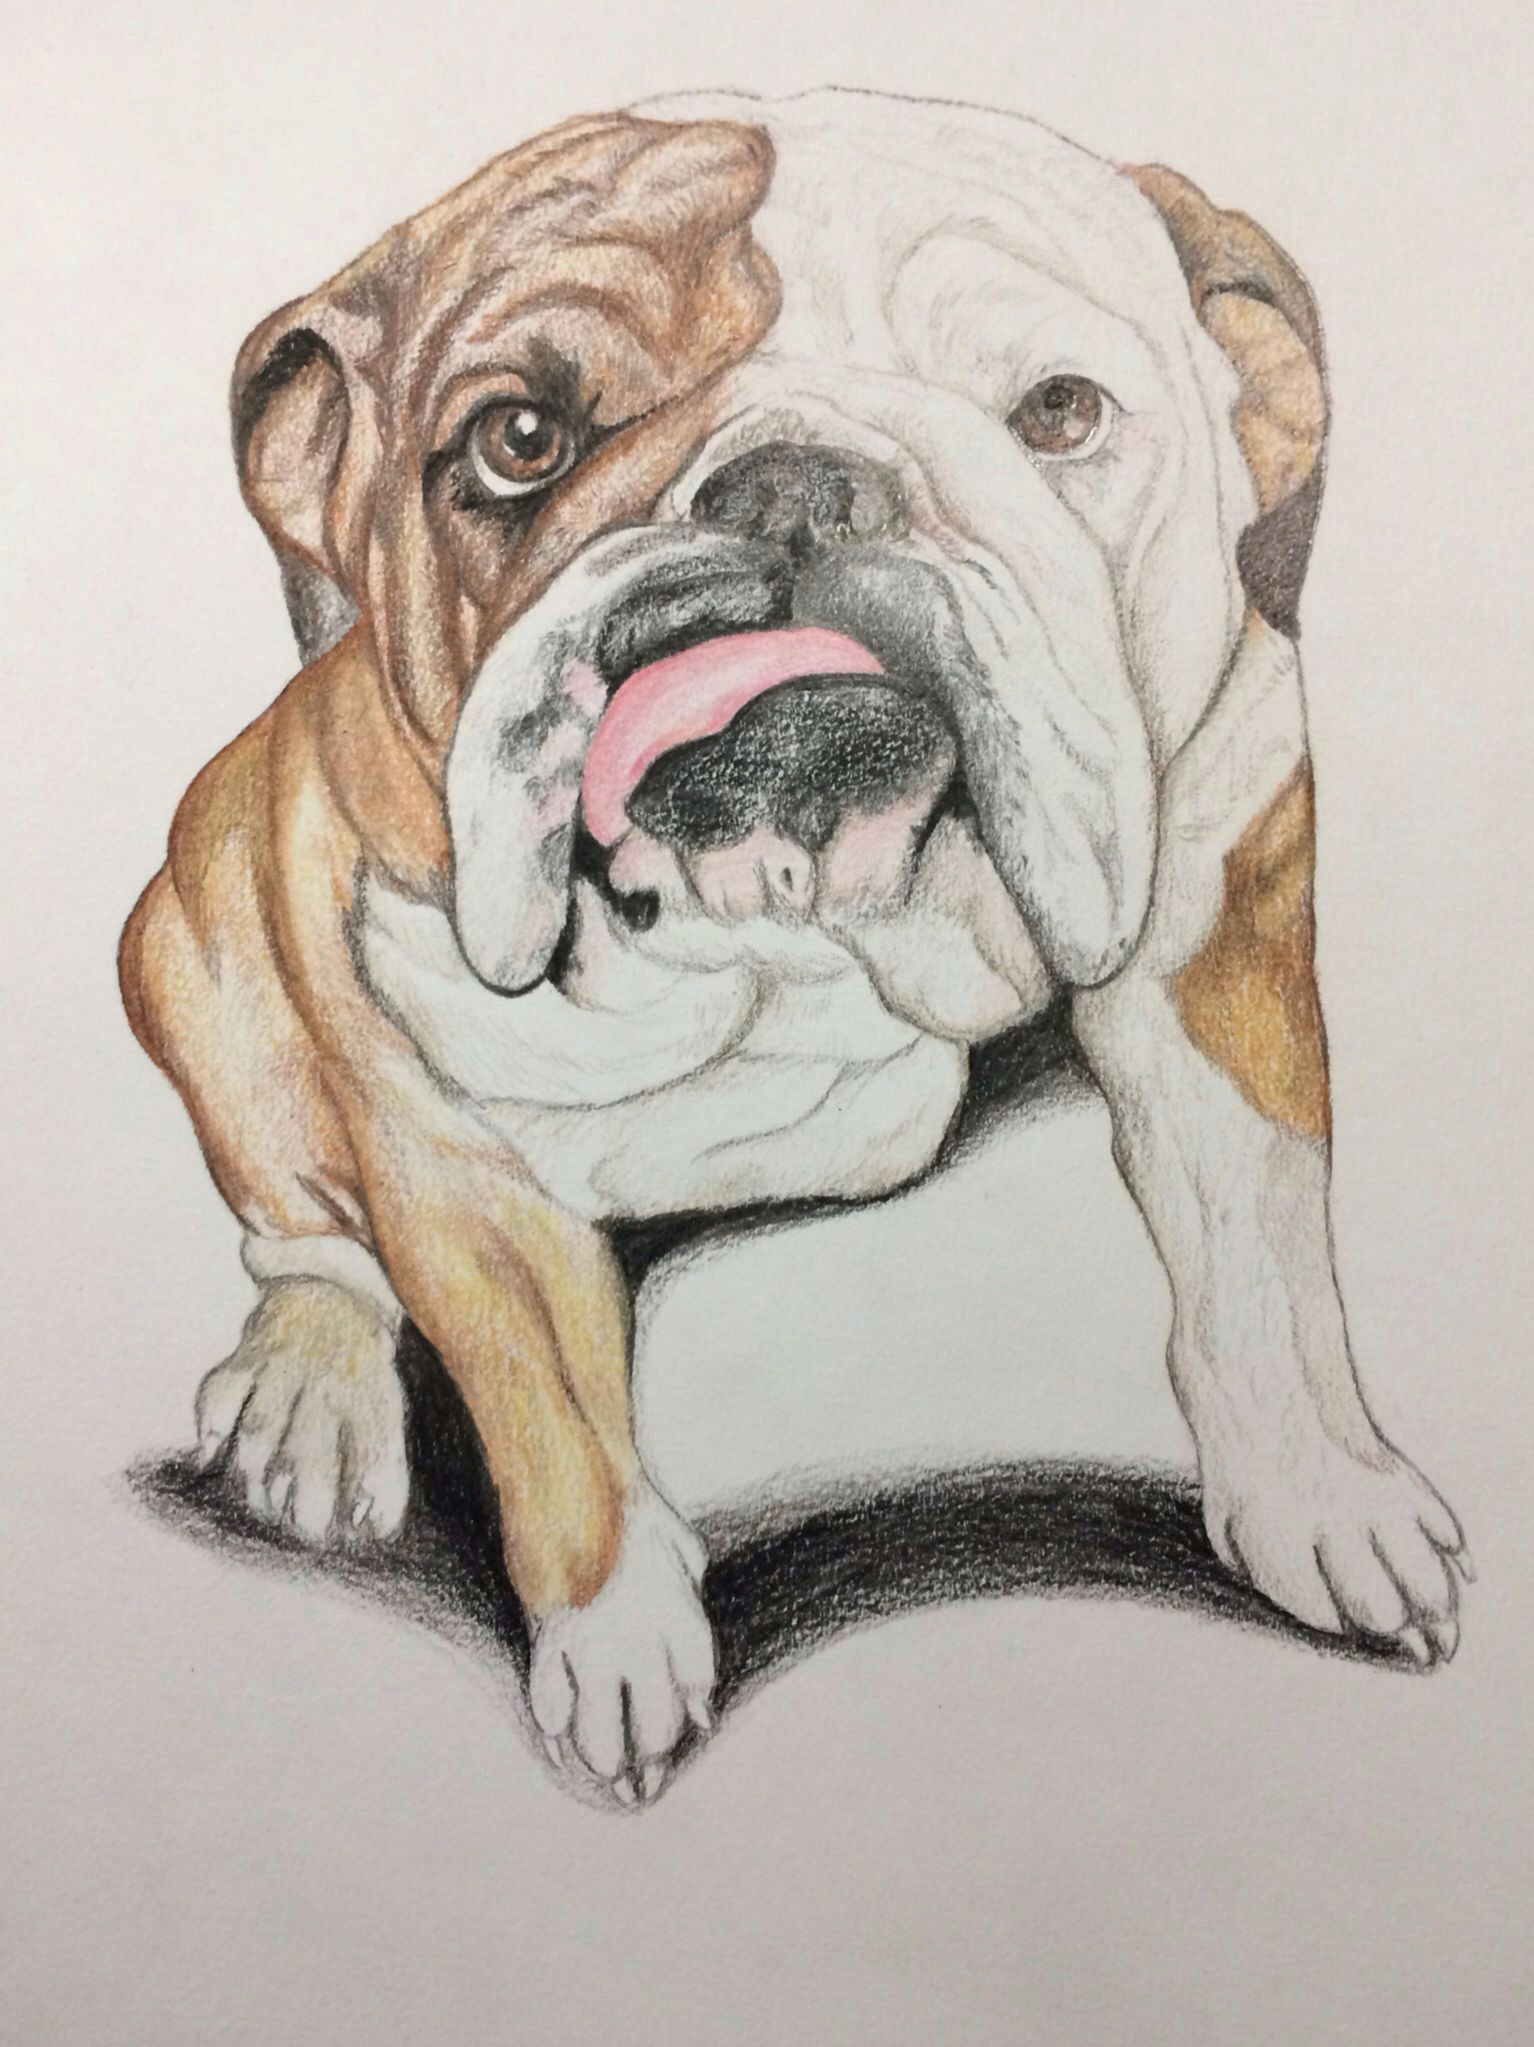 Drawing Of My Dog This is A Bulldog Portrait I Drew I Love Drawing and Bulldogs are